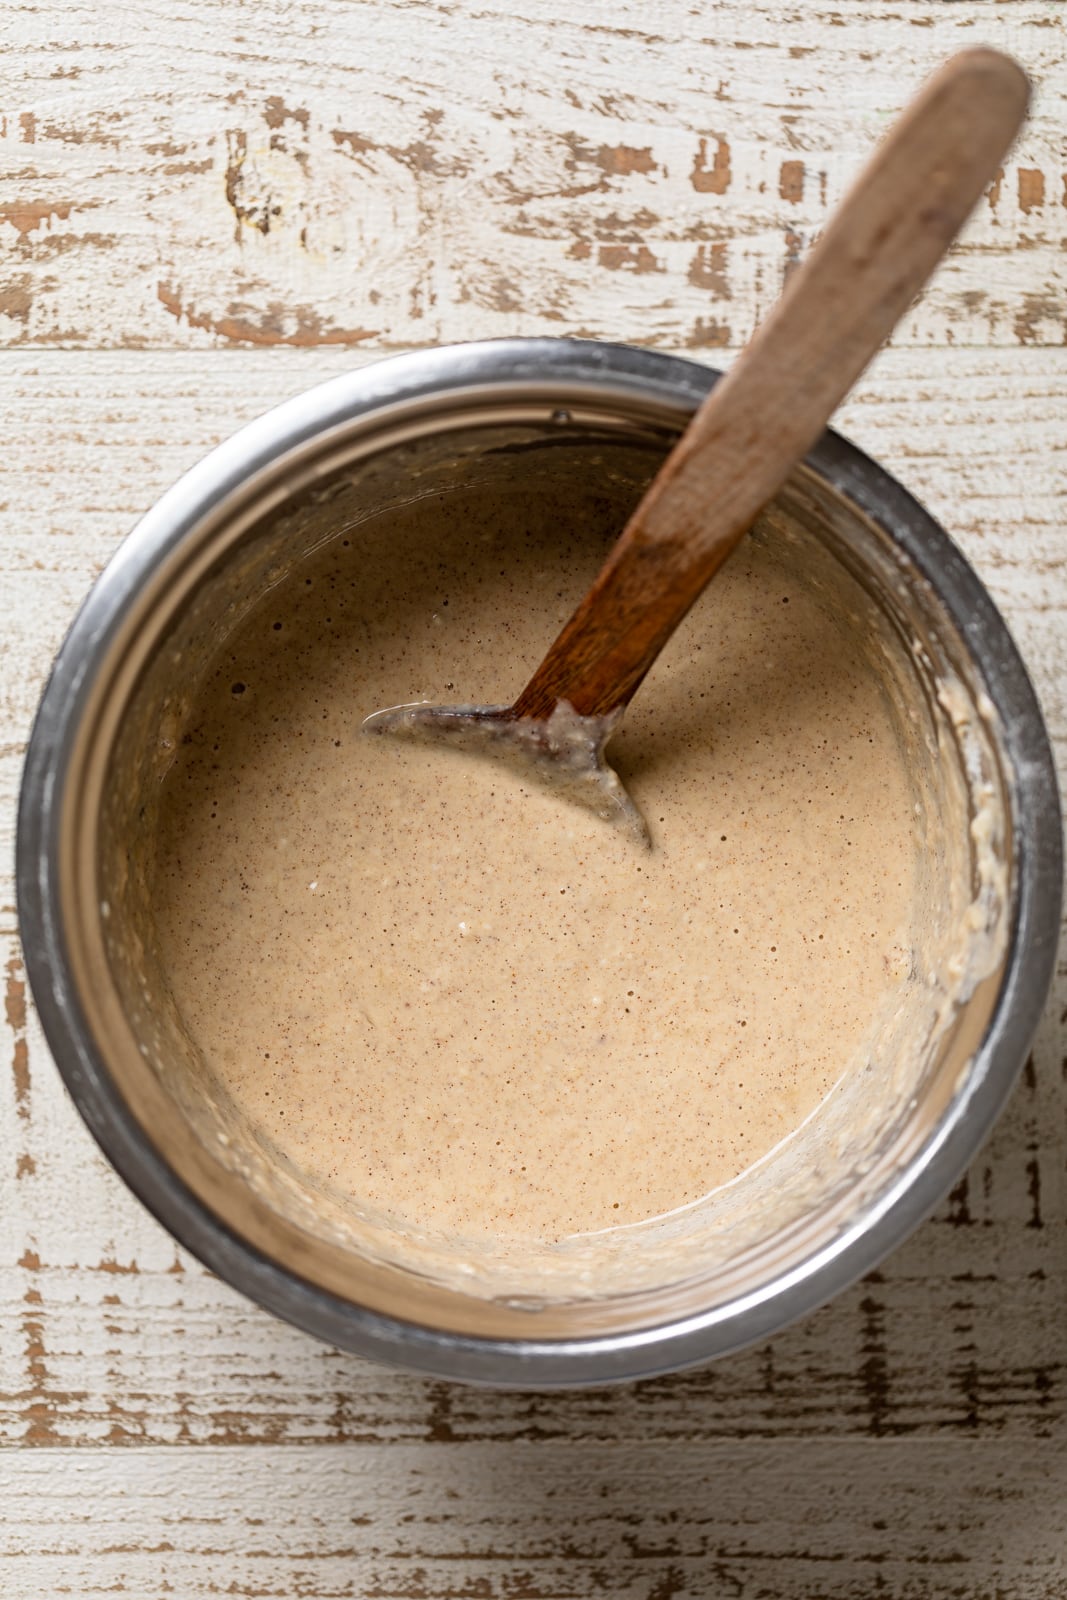 Wooden spoon in a bowl of Healthy Banana Bread Pancake batter